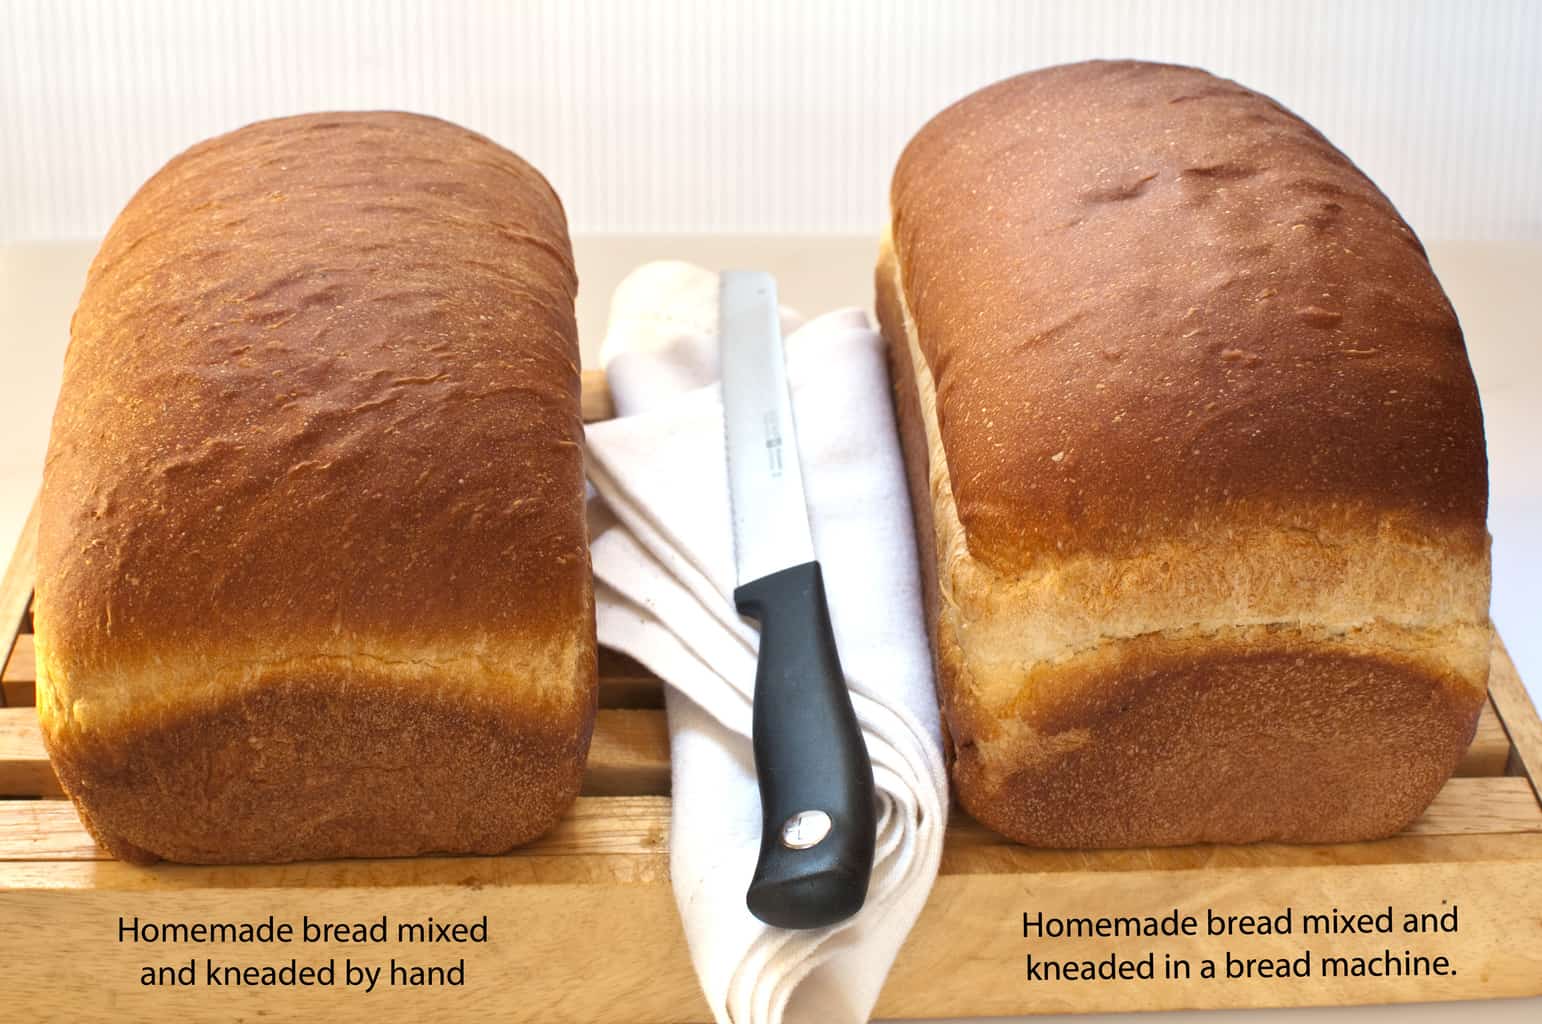  unsliced bread--one mixed by hand and other mixed in bread maker; comparison pic